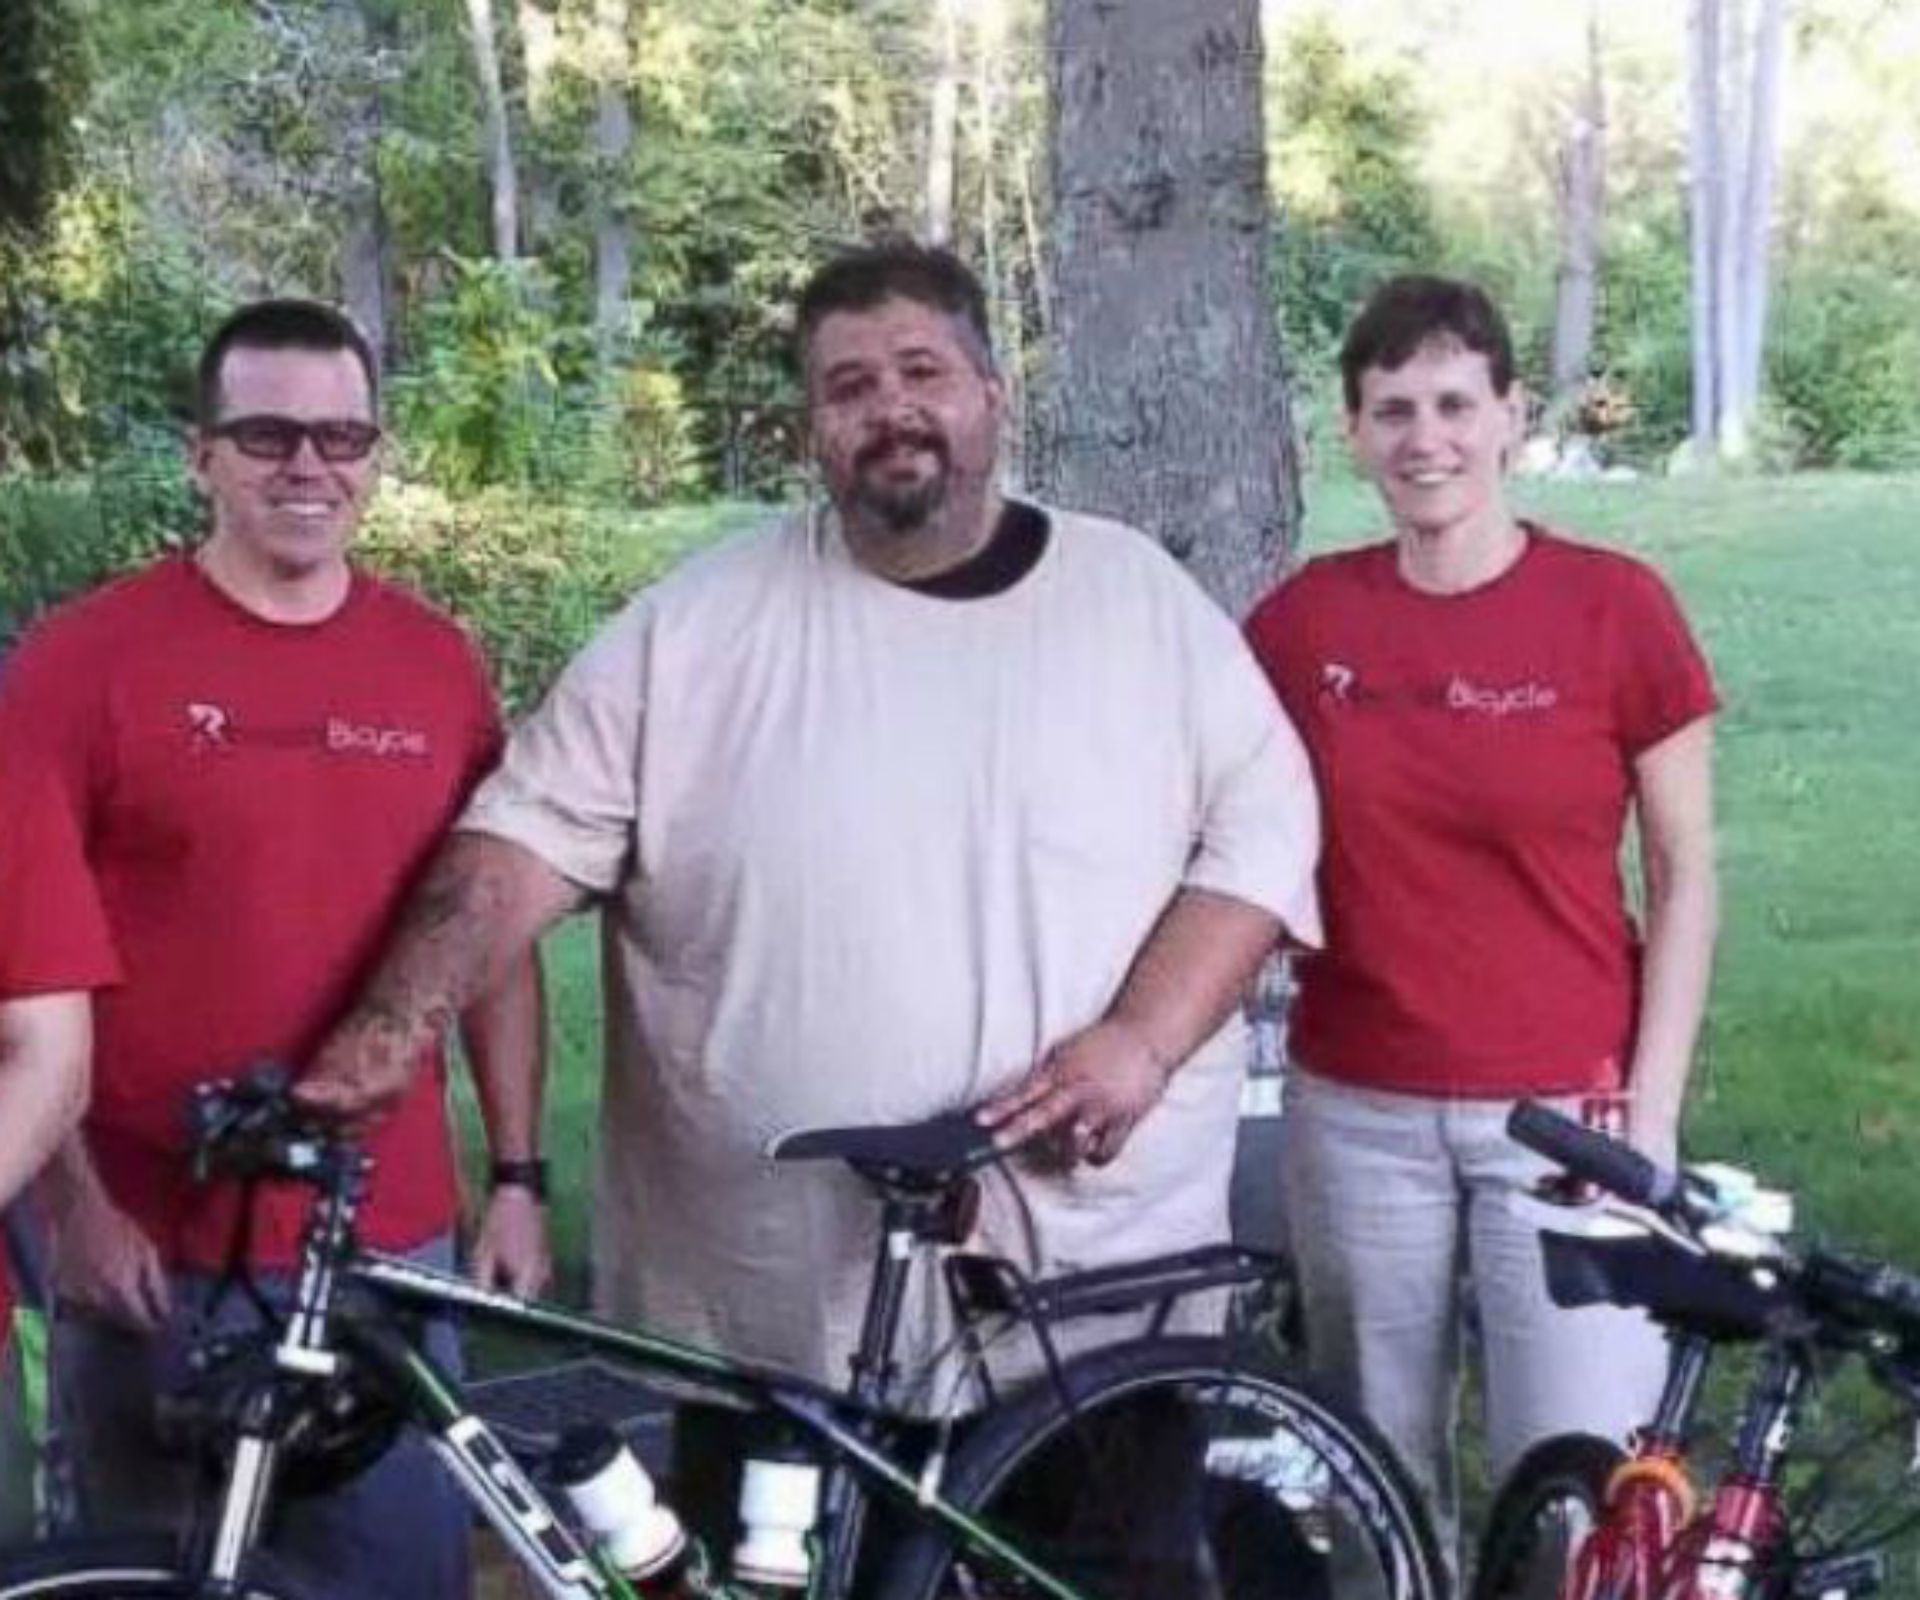 255kg man cycles across country to win back wife